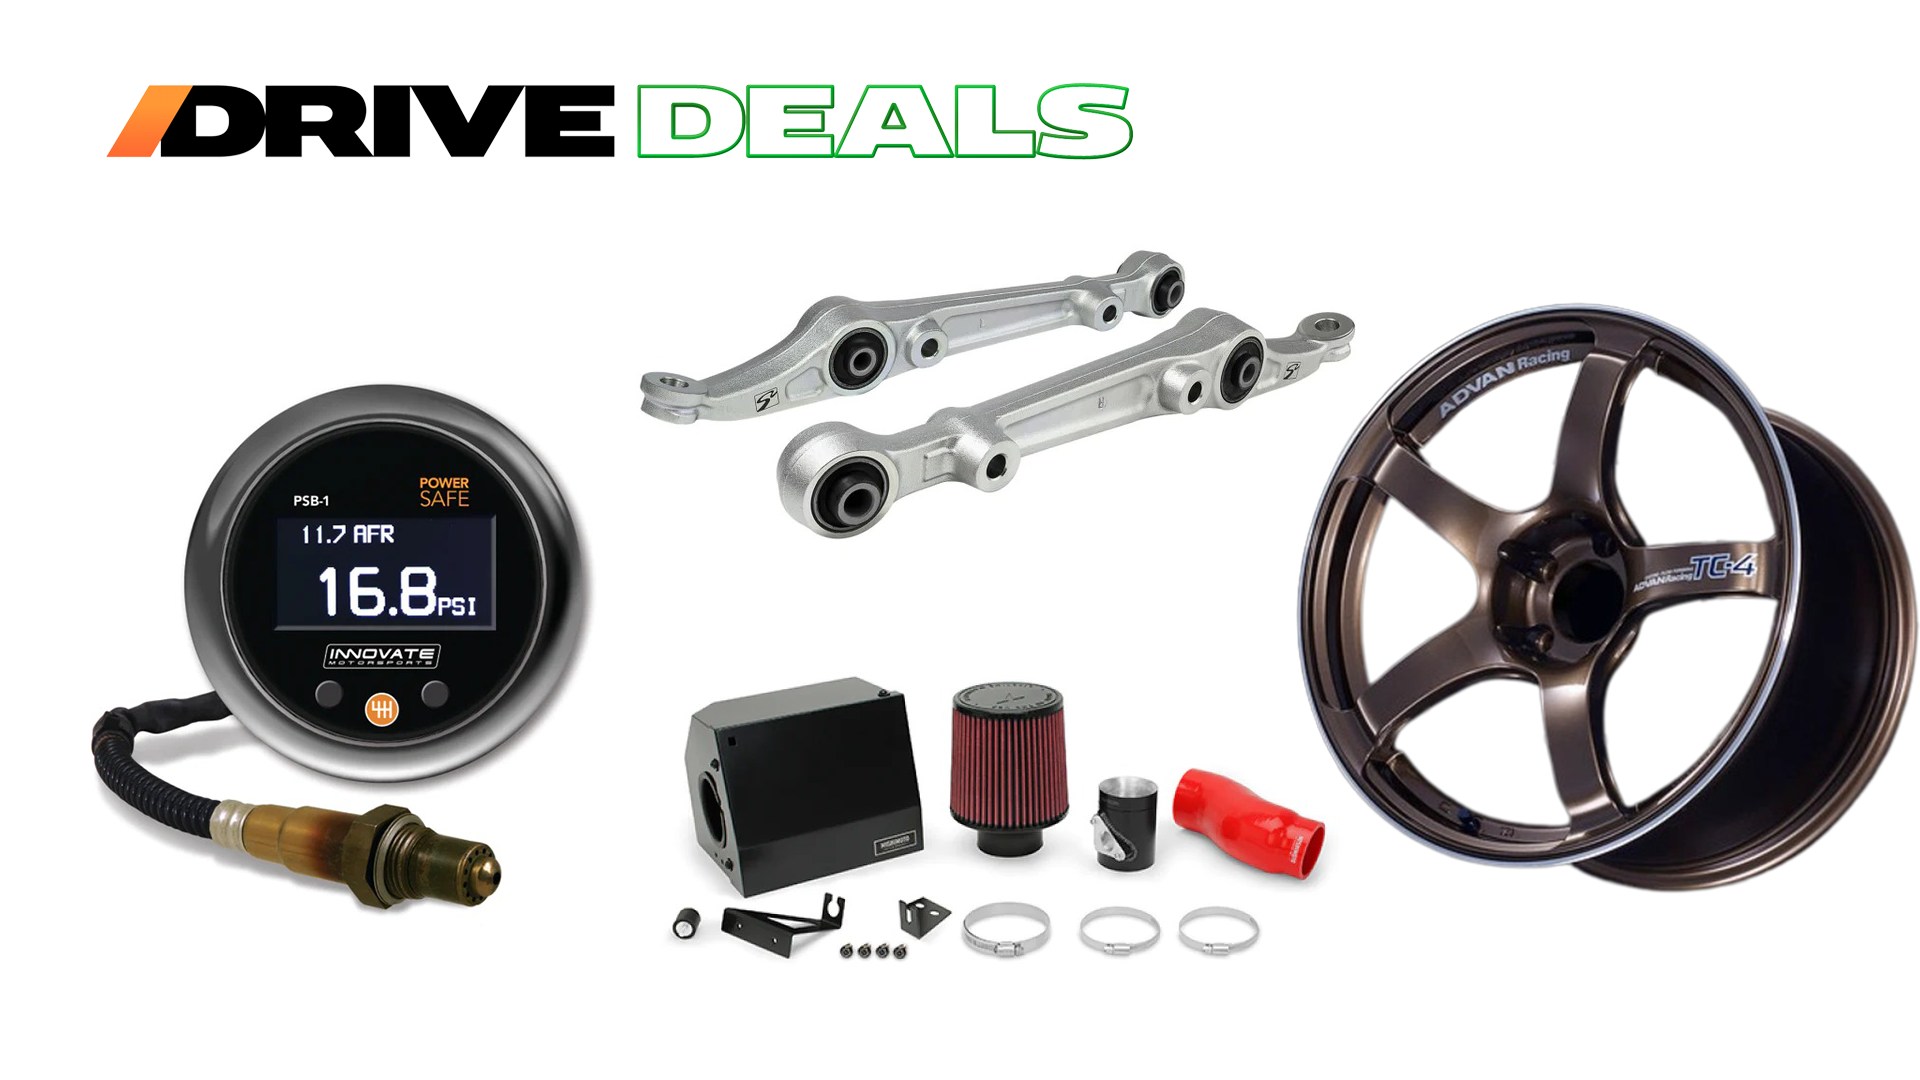 We Found Awesome Deals on Tuner Parts at Throtl